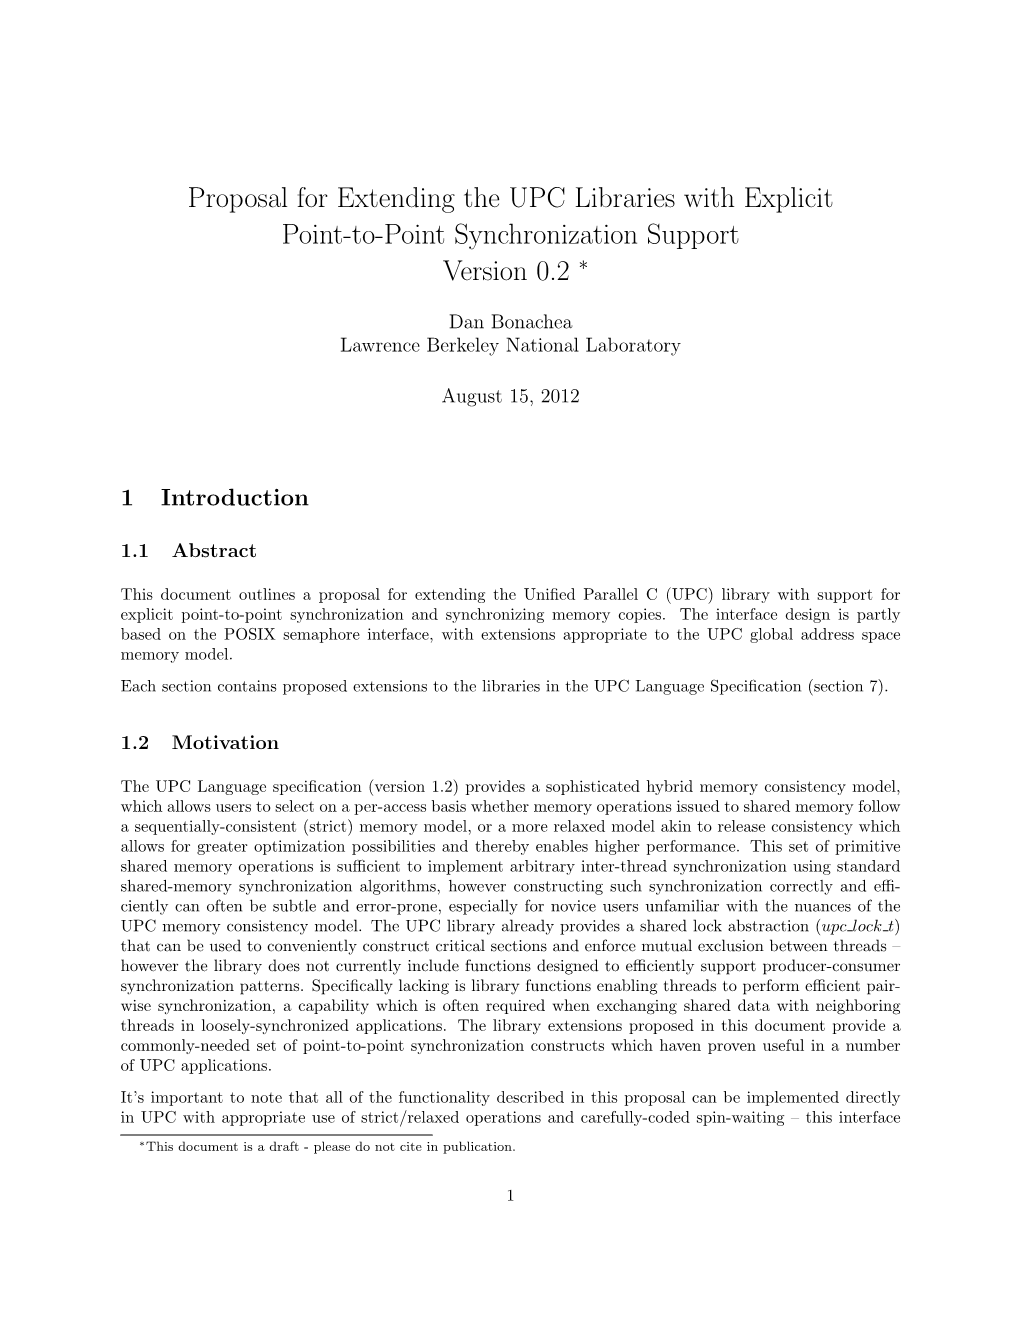 Proposal for Extending the UPC Libraries with Explicit Point-To-Point Synchronization Support Version 0.2 ∗